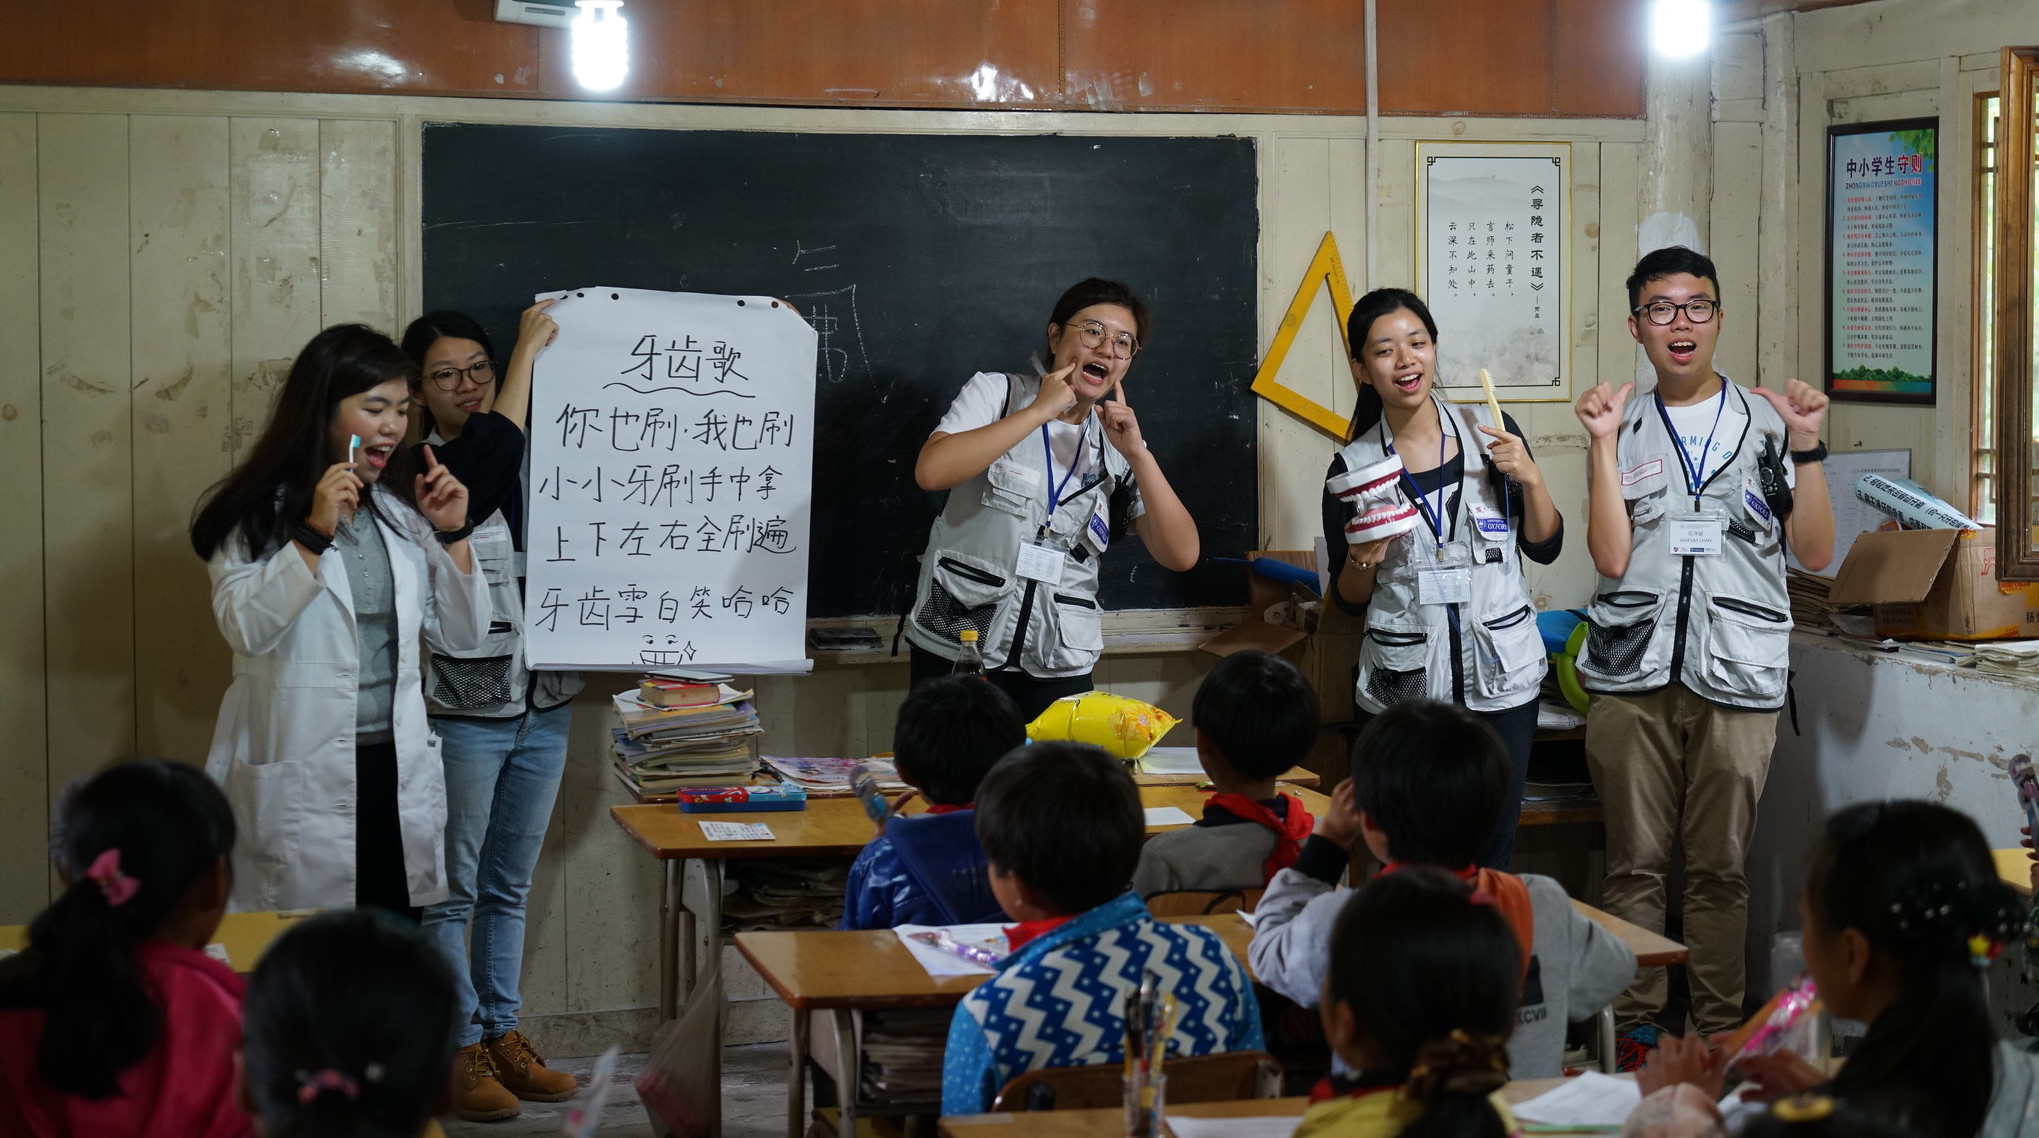 Students design and conduct health intervention activities for vulnerable populations such as left-behind children in rural China.